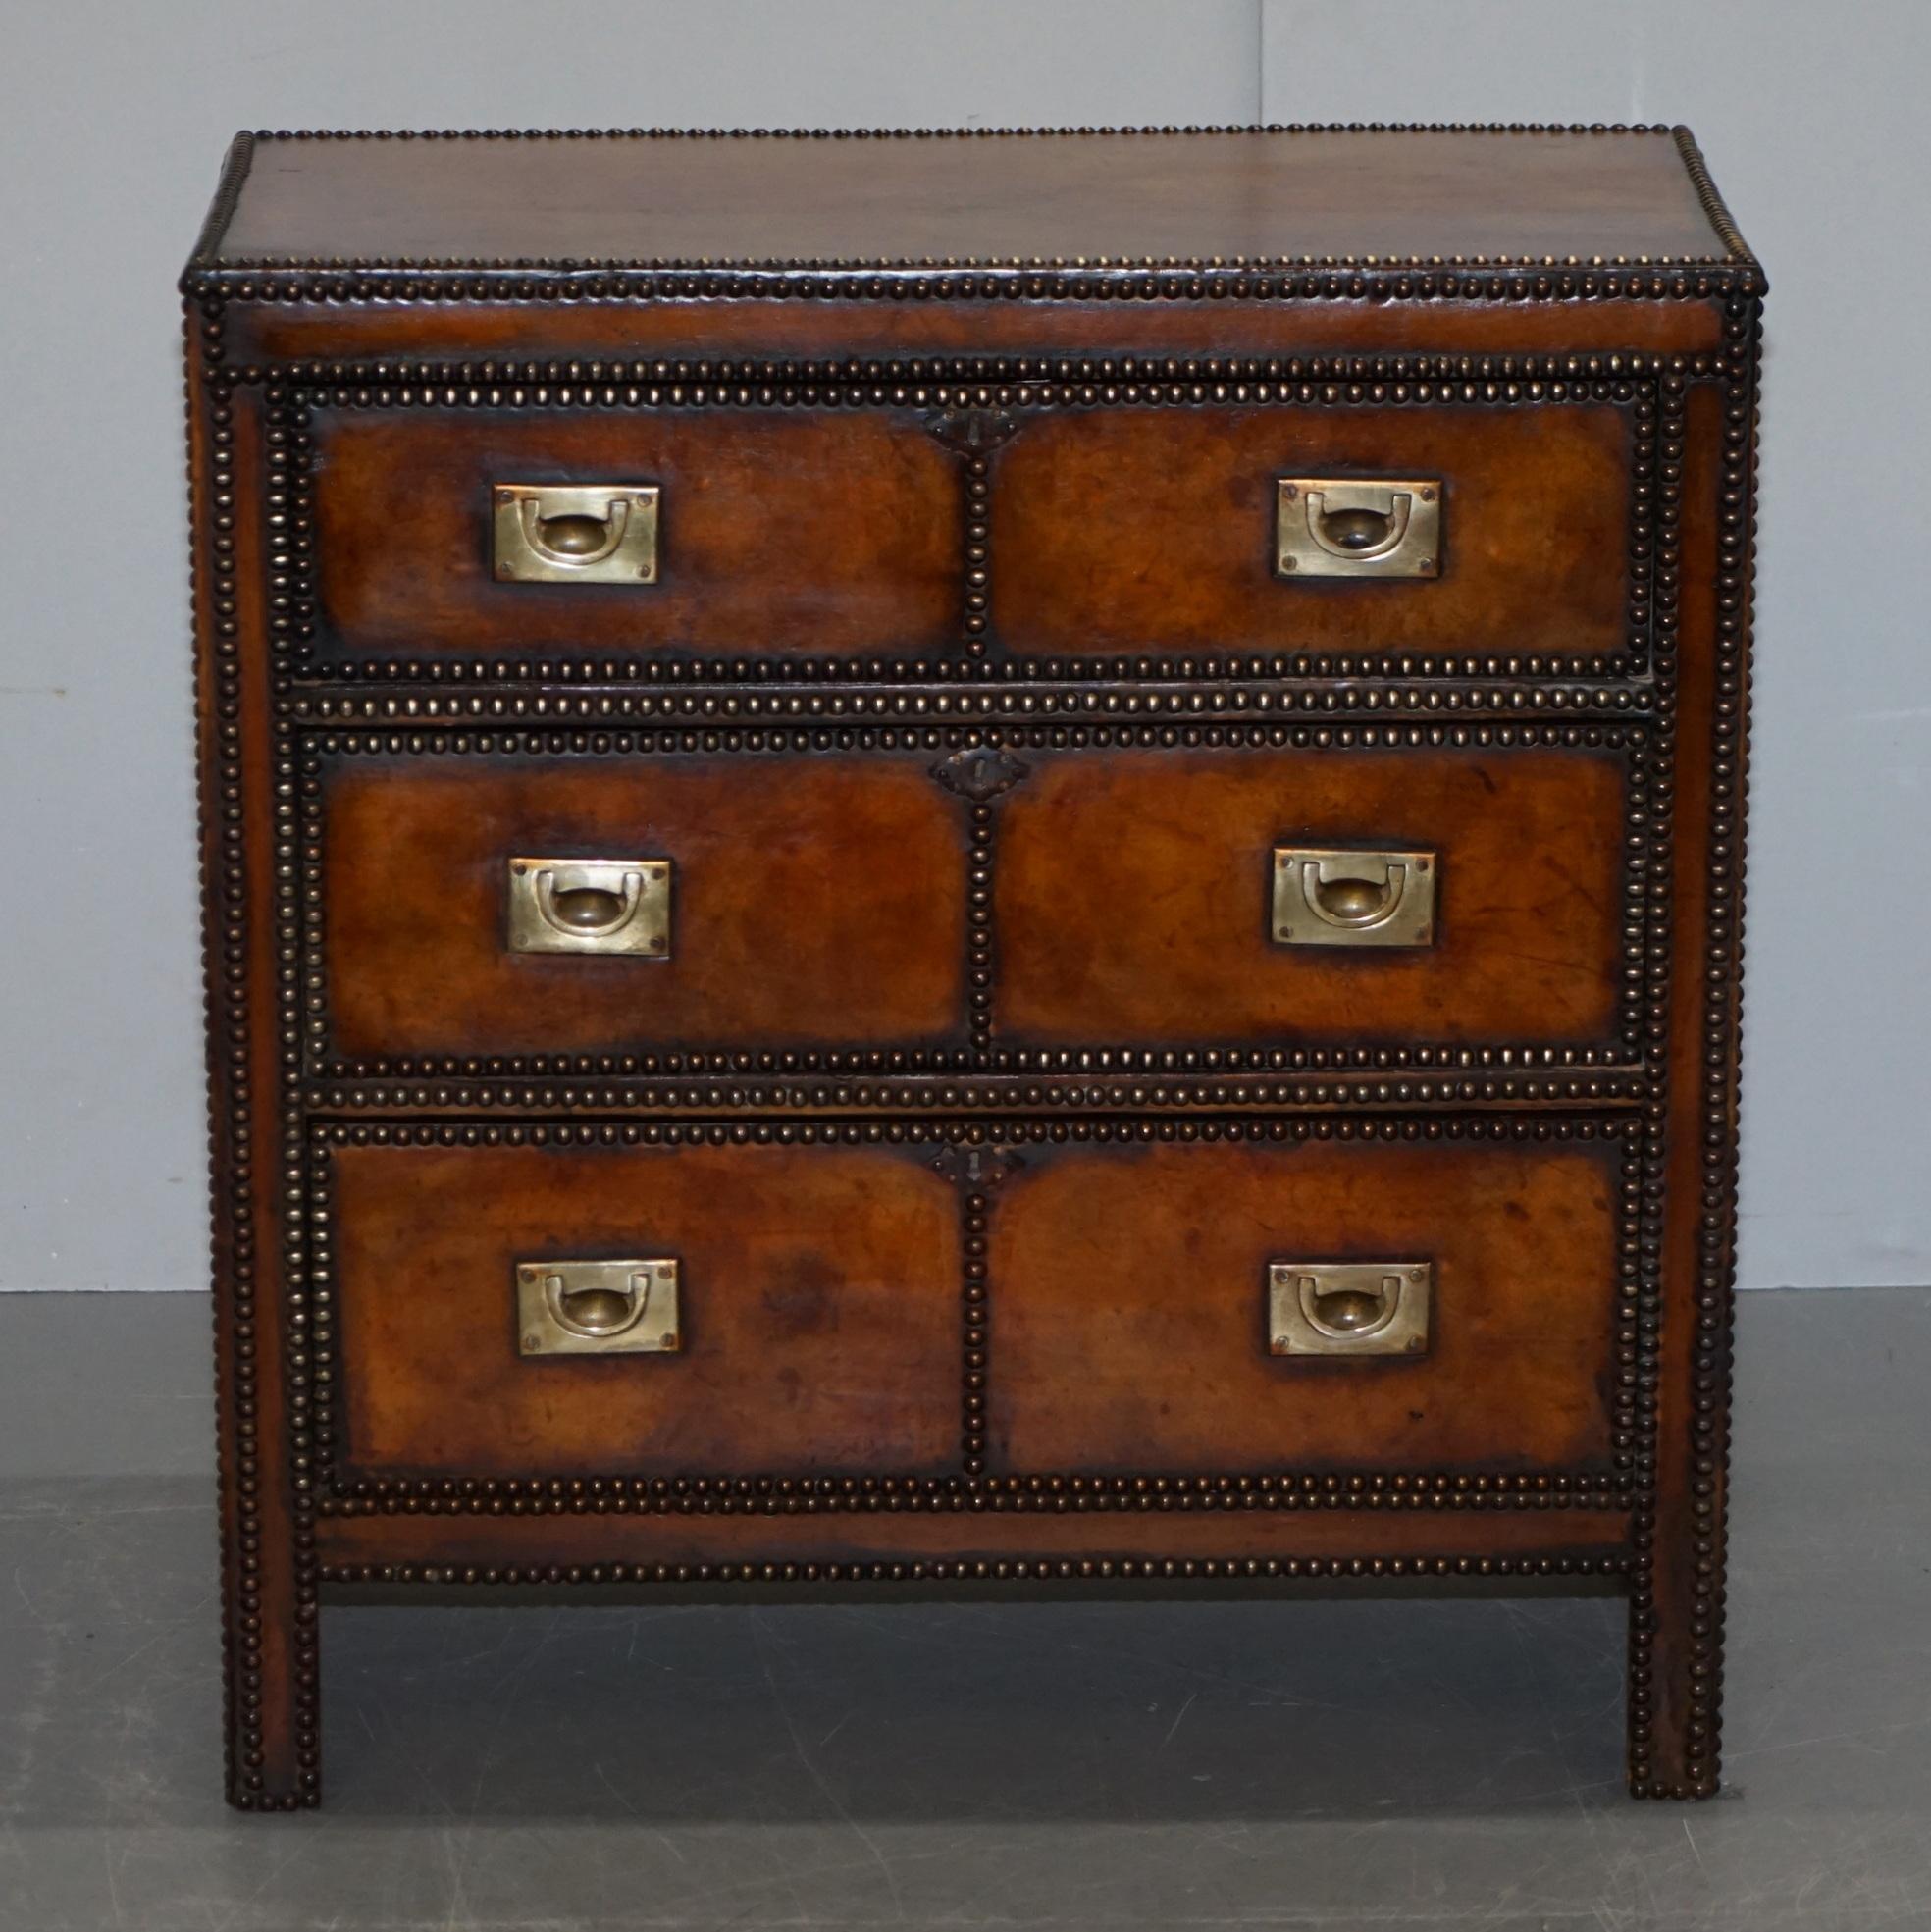 We are delighted to offer for sale this very fine fully restored Victorian hand dyed brown leather exquisitely studded chest of drawers with military Campaign handles 

A very well made and decorative chest of drawers, I’ve never seen another from